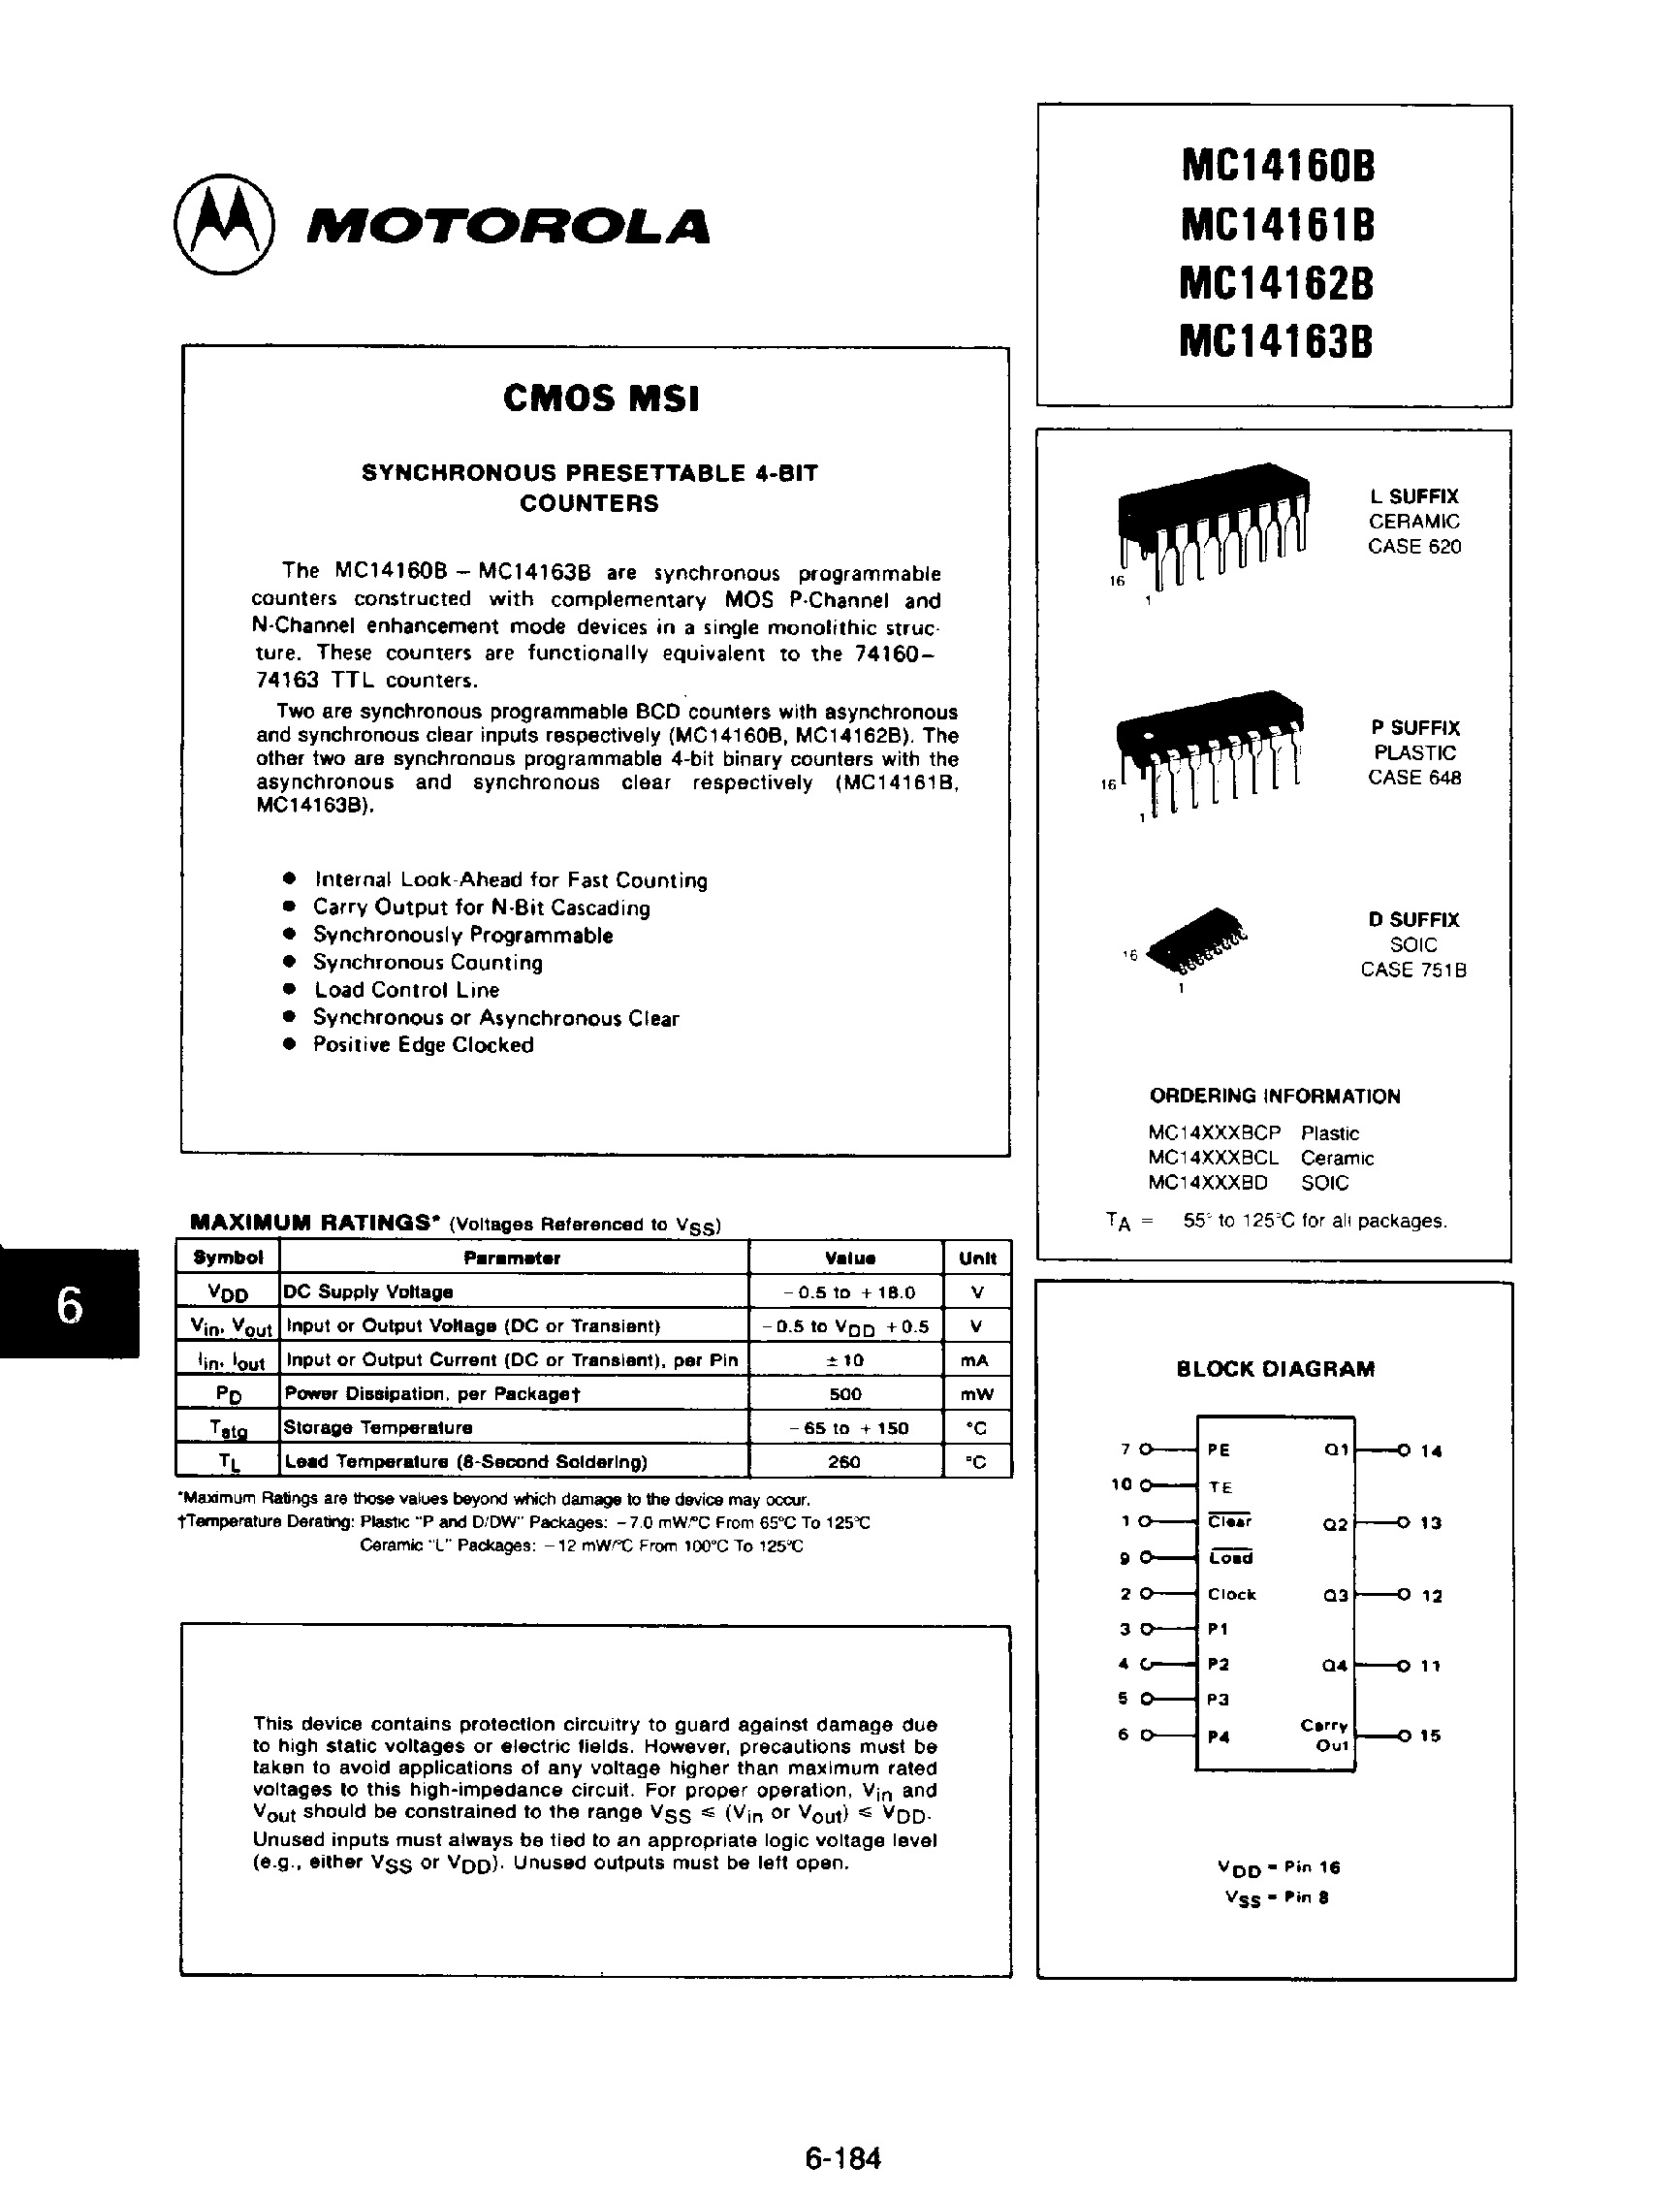 Datasheet MC14162B - Synchronous Presettable 4-Bit Counters page 1